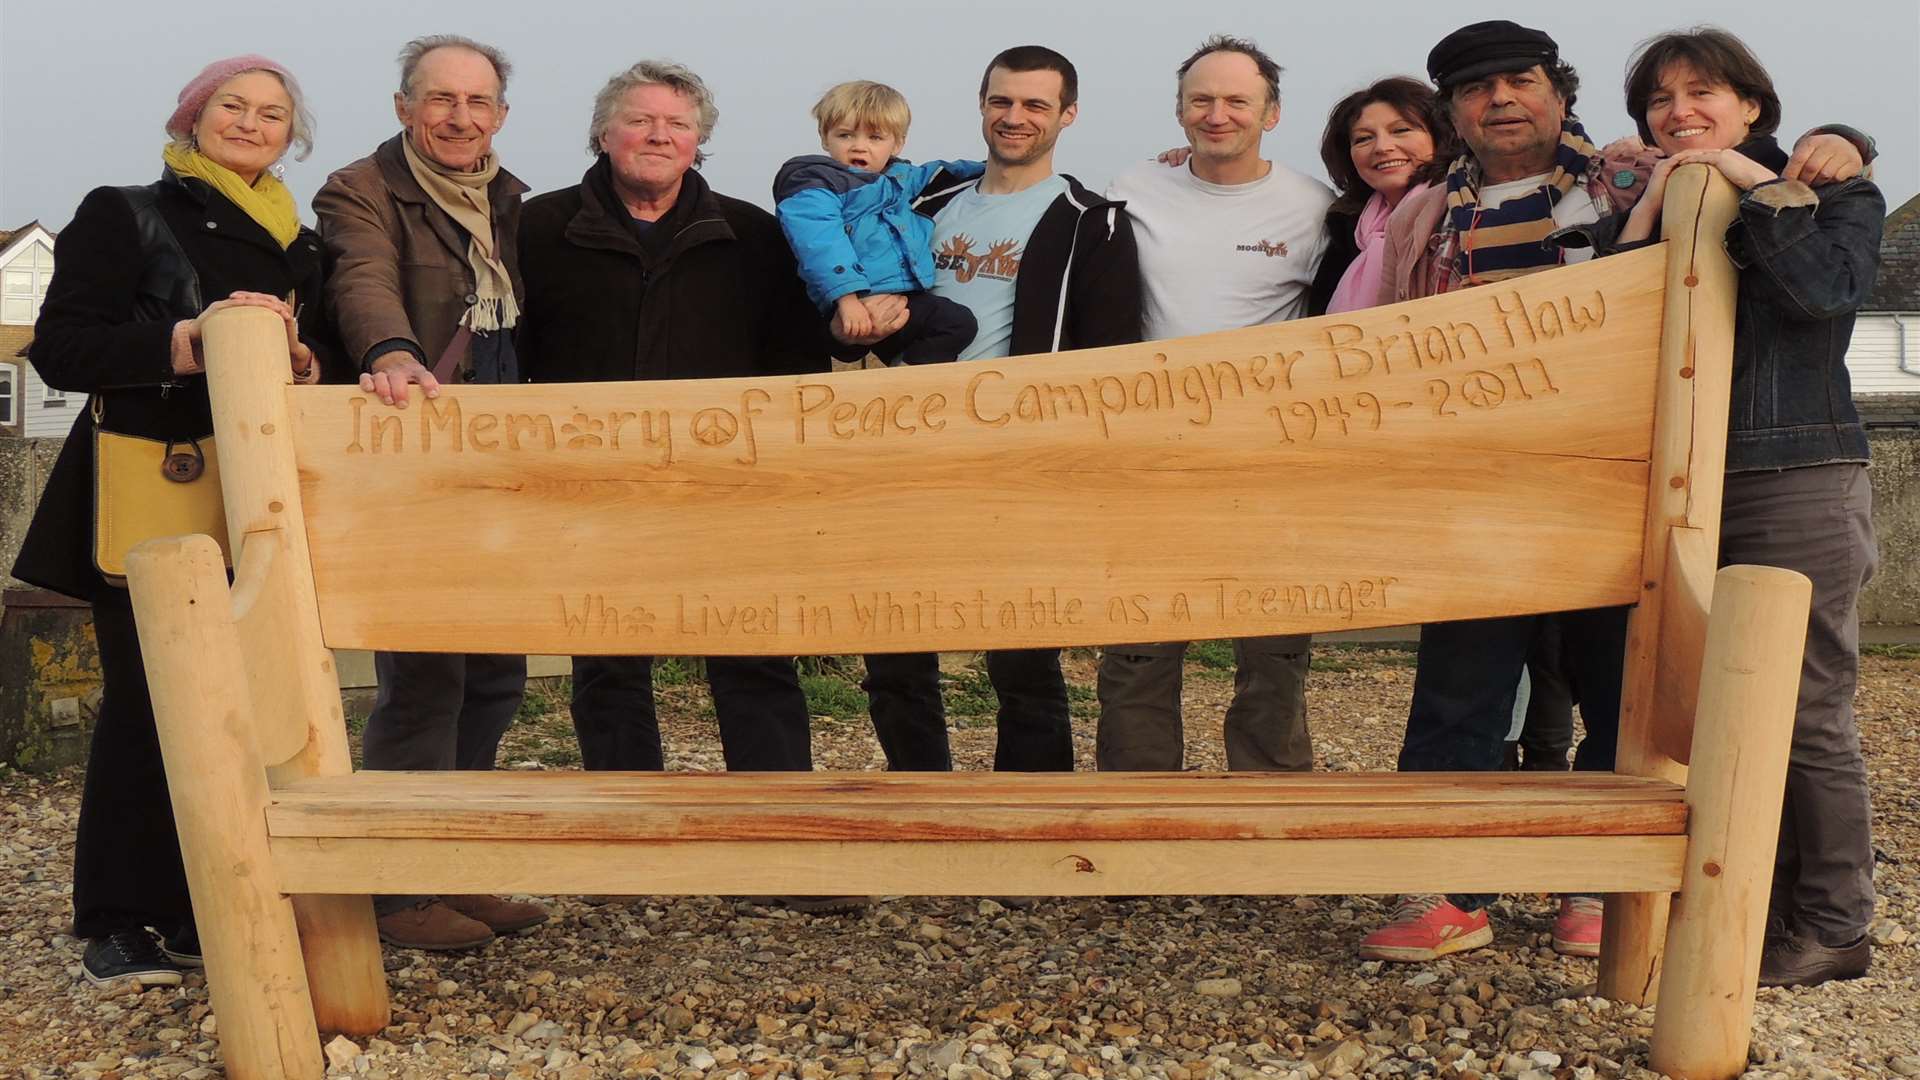 Bench designers and local campaigners with the Brian Haw Memorial Bench.